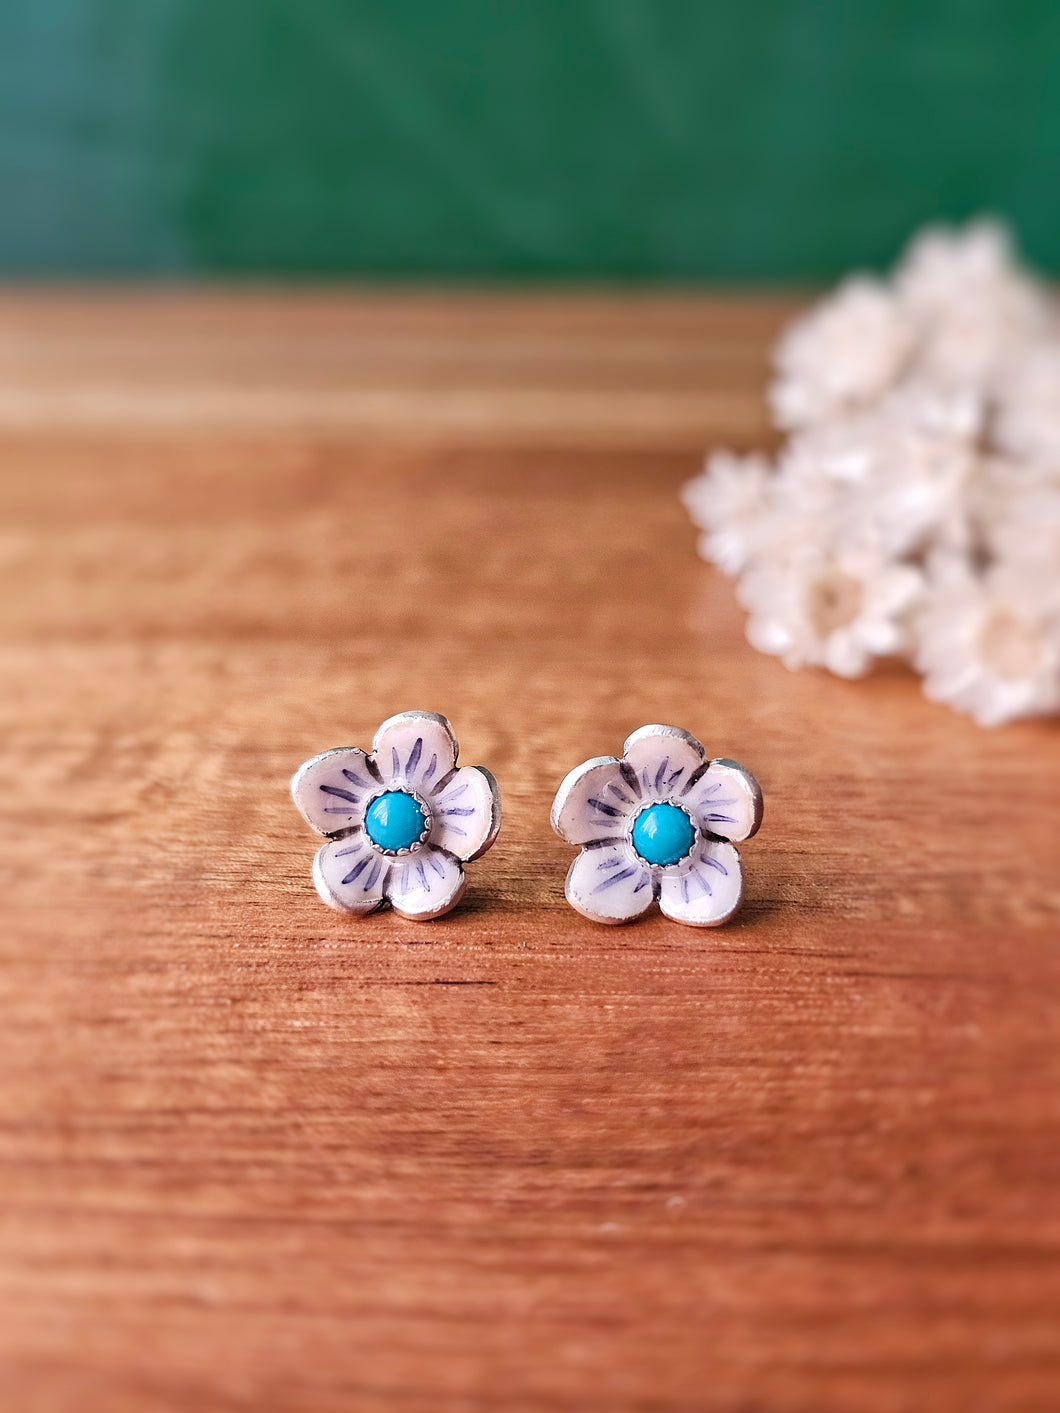 Enamel Flower Studs - White with Turquoise